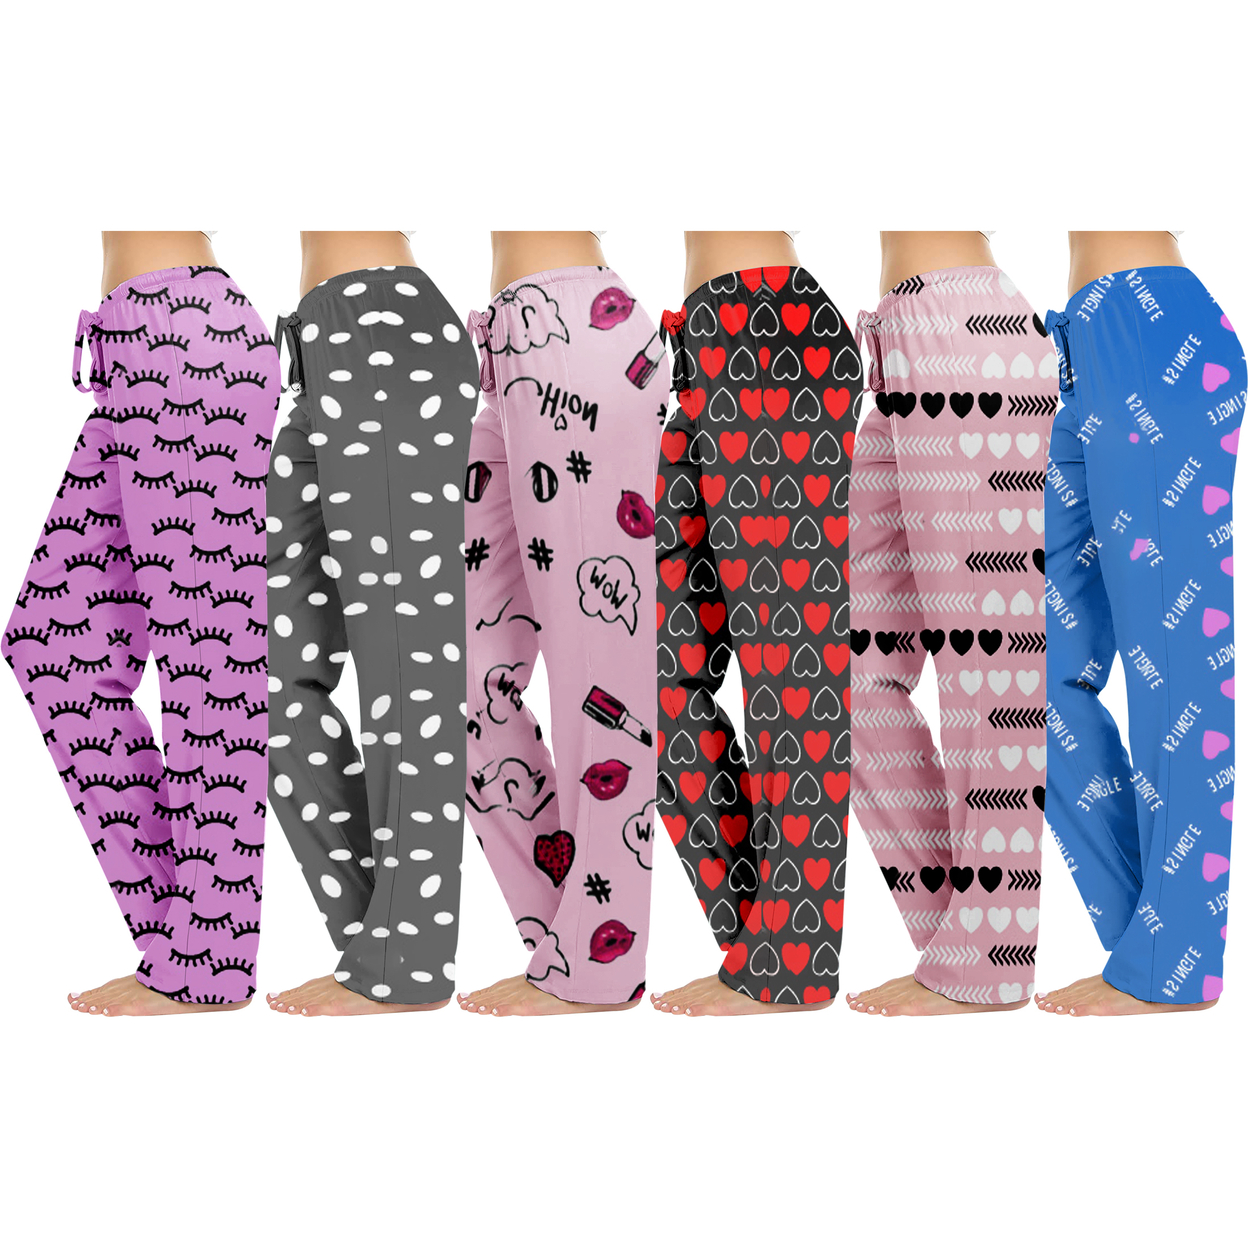 4-Pack: Women's Casual Fun Printed Lightweight Lounge Terry Knit Pajama Bottom Pants - X-large, Shapes